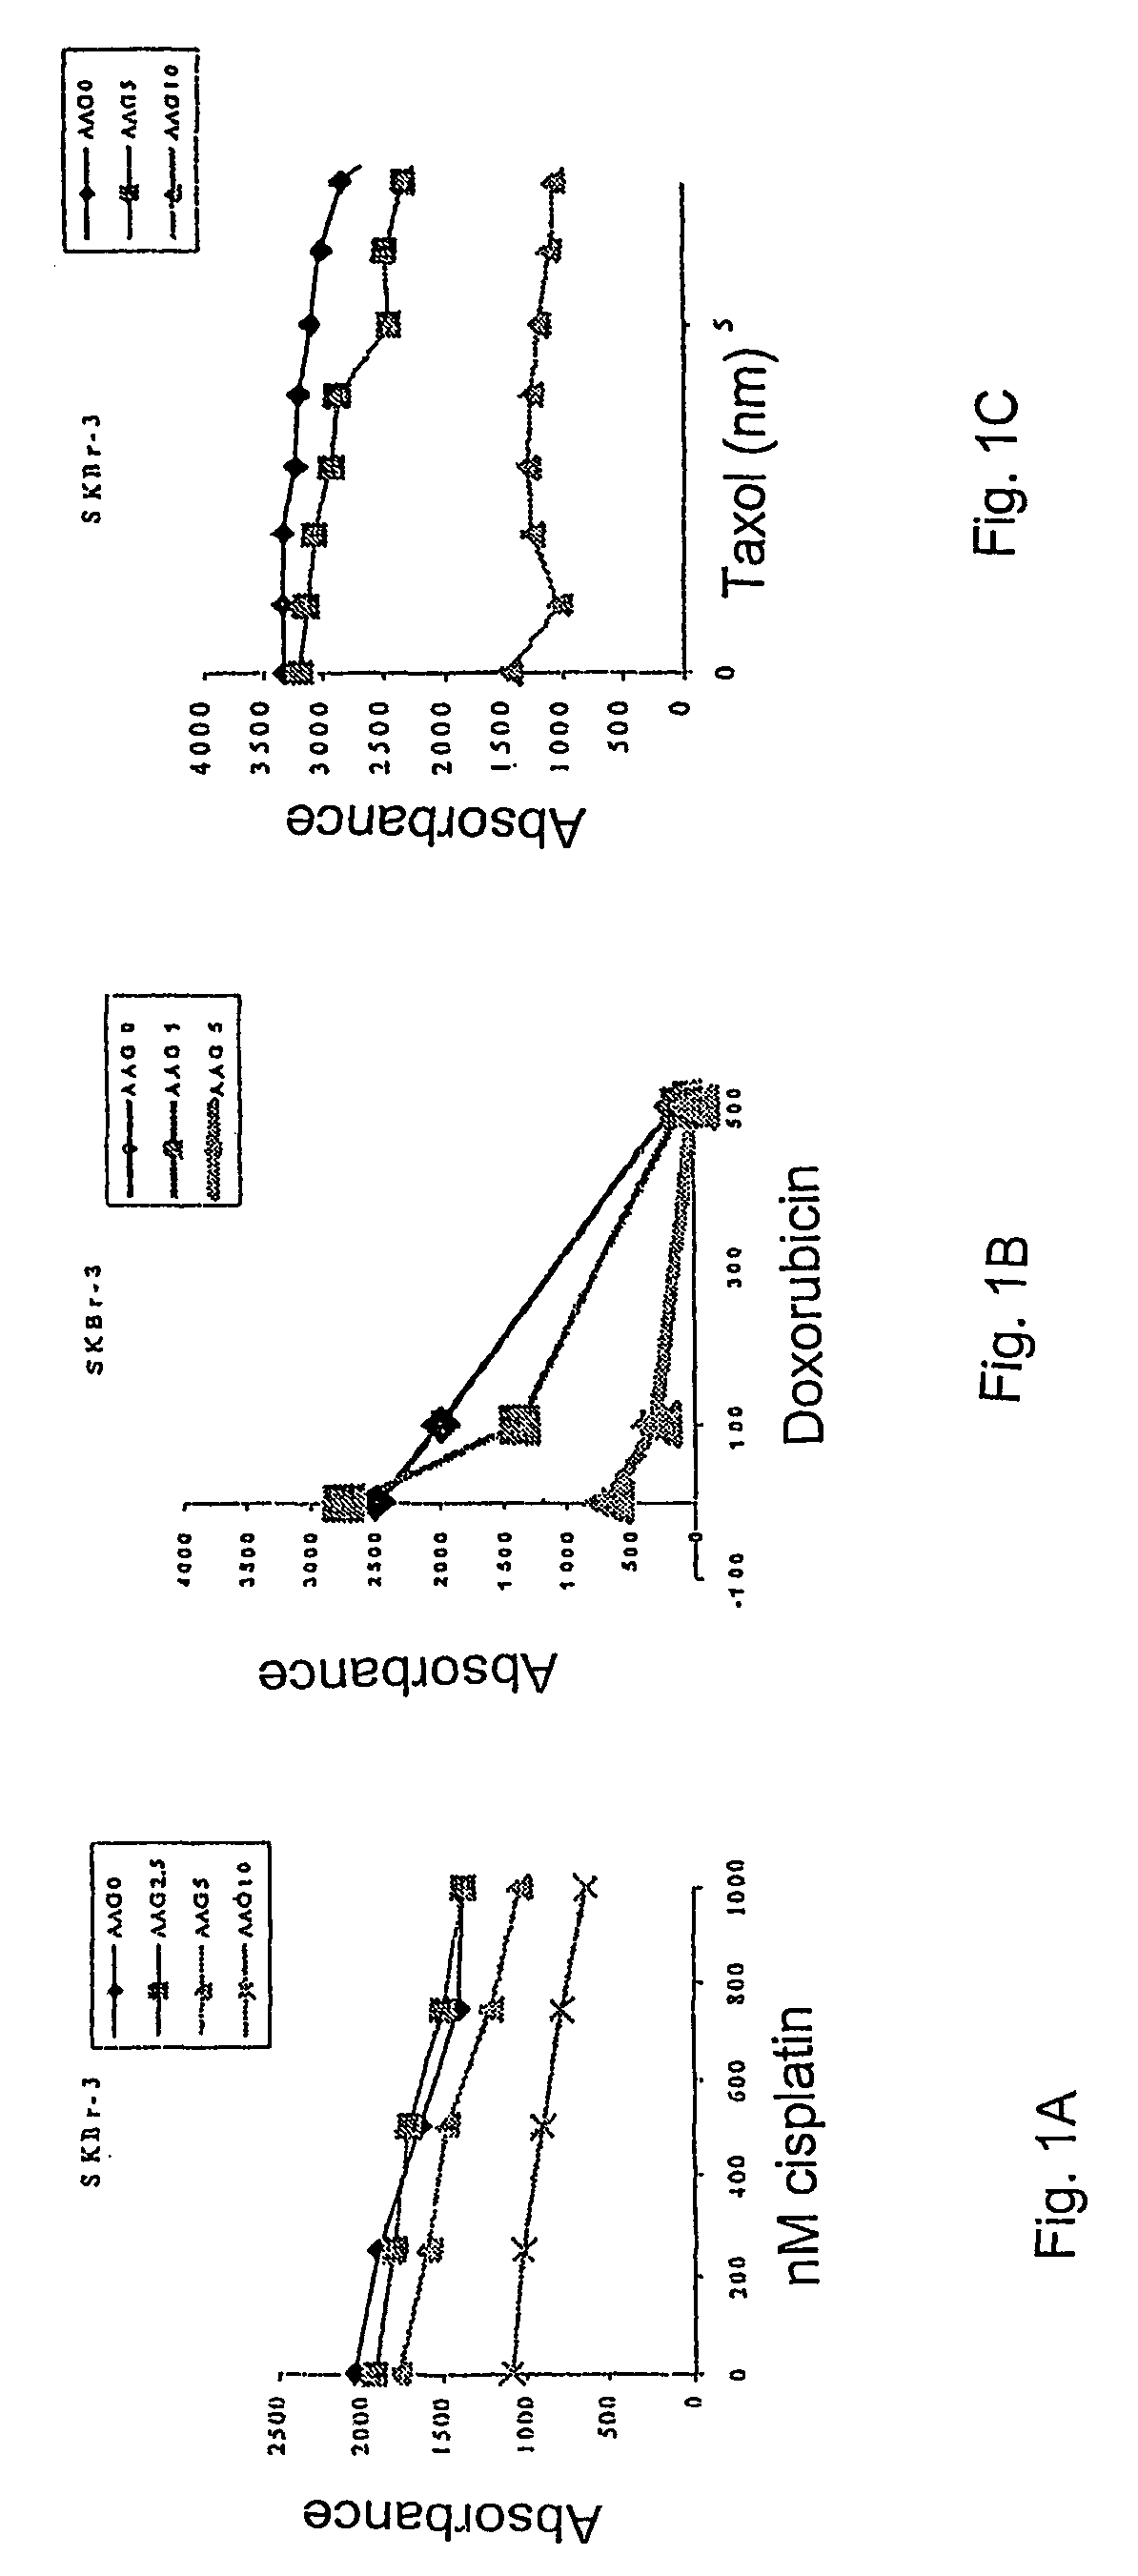 Methods for enhancing the efficacy of cytotoxic agents through the use of HSP90 inhibitors